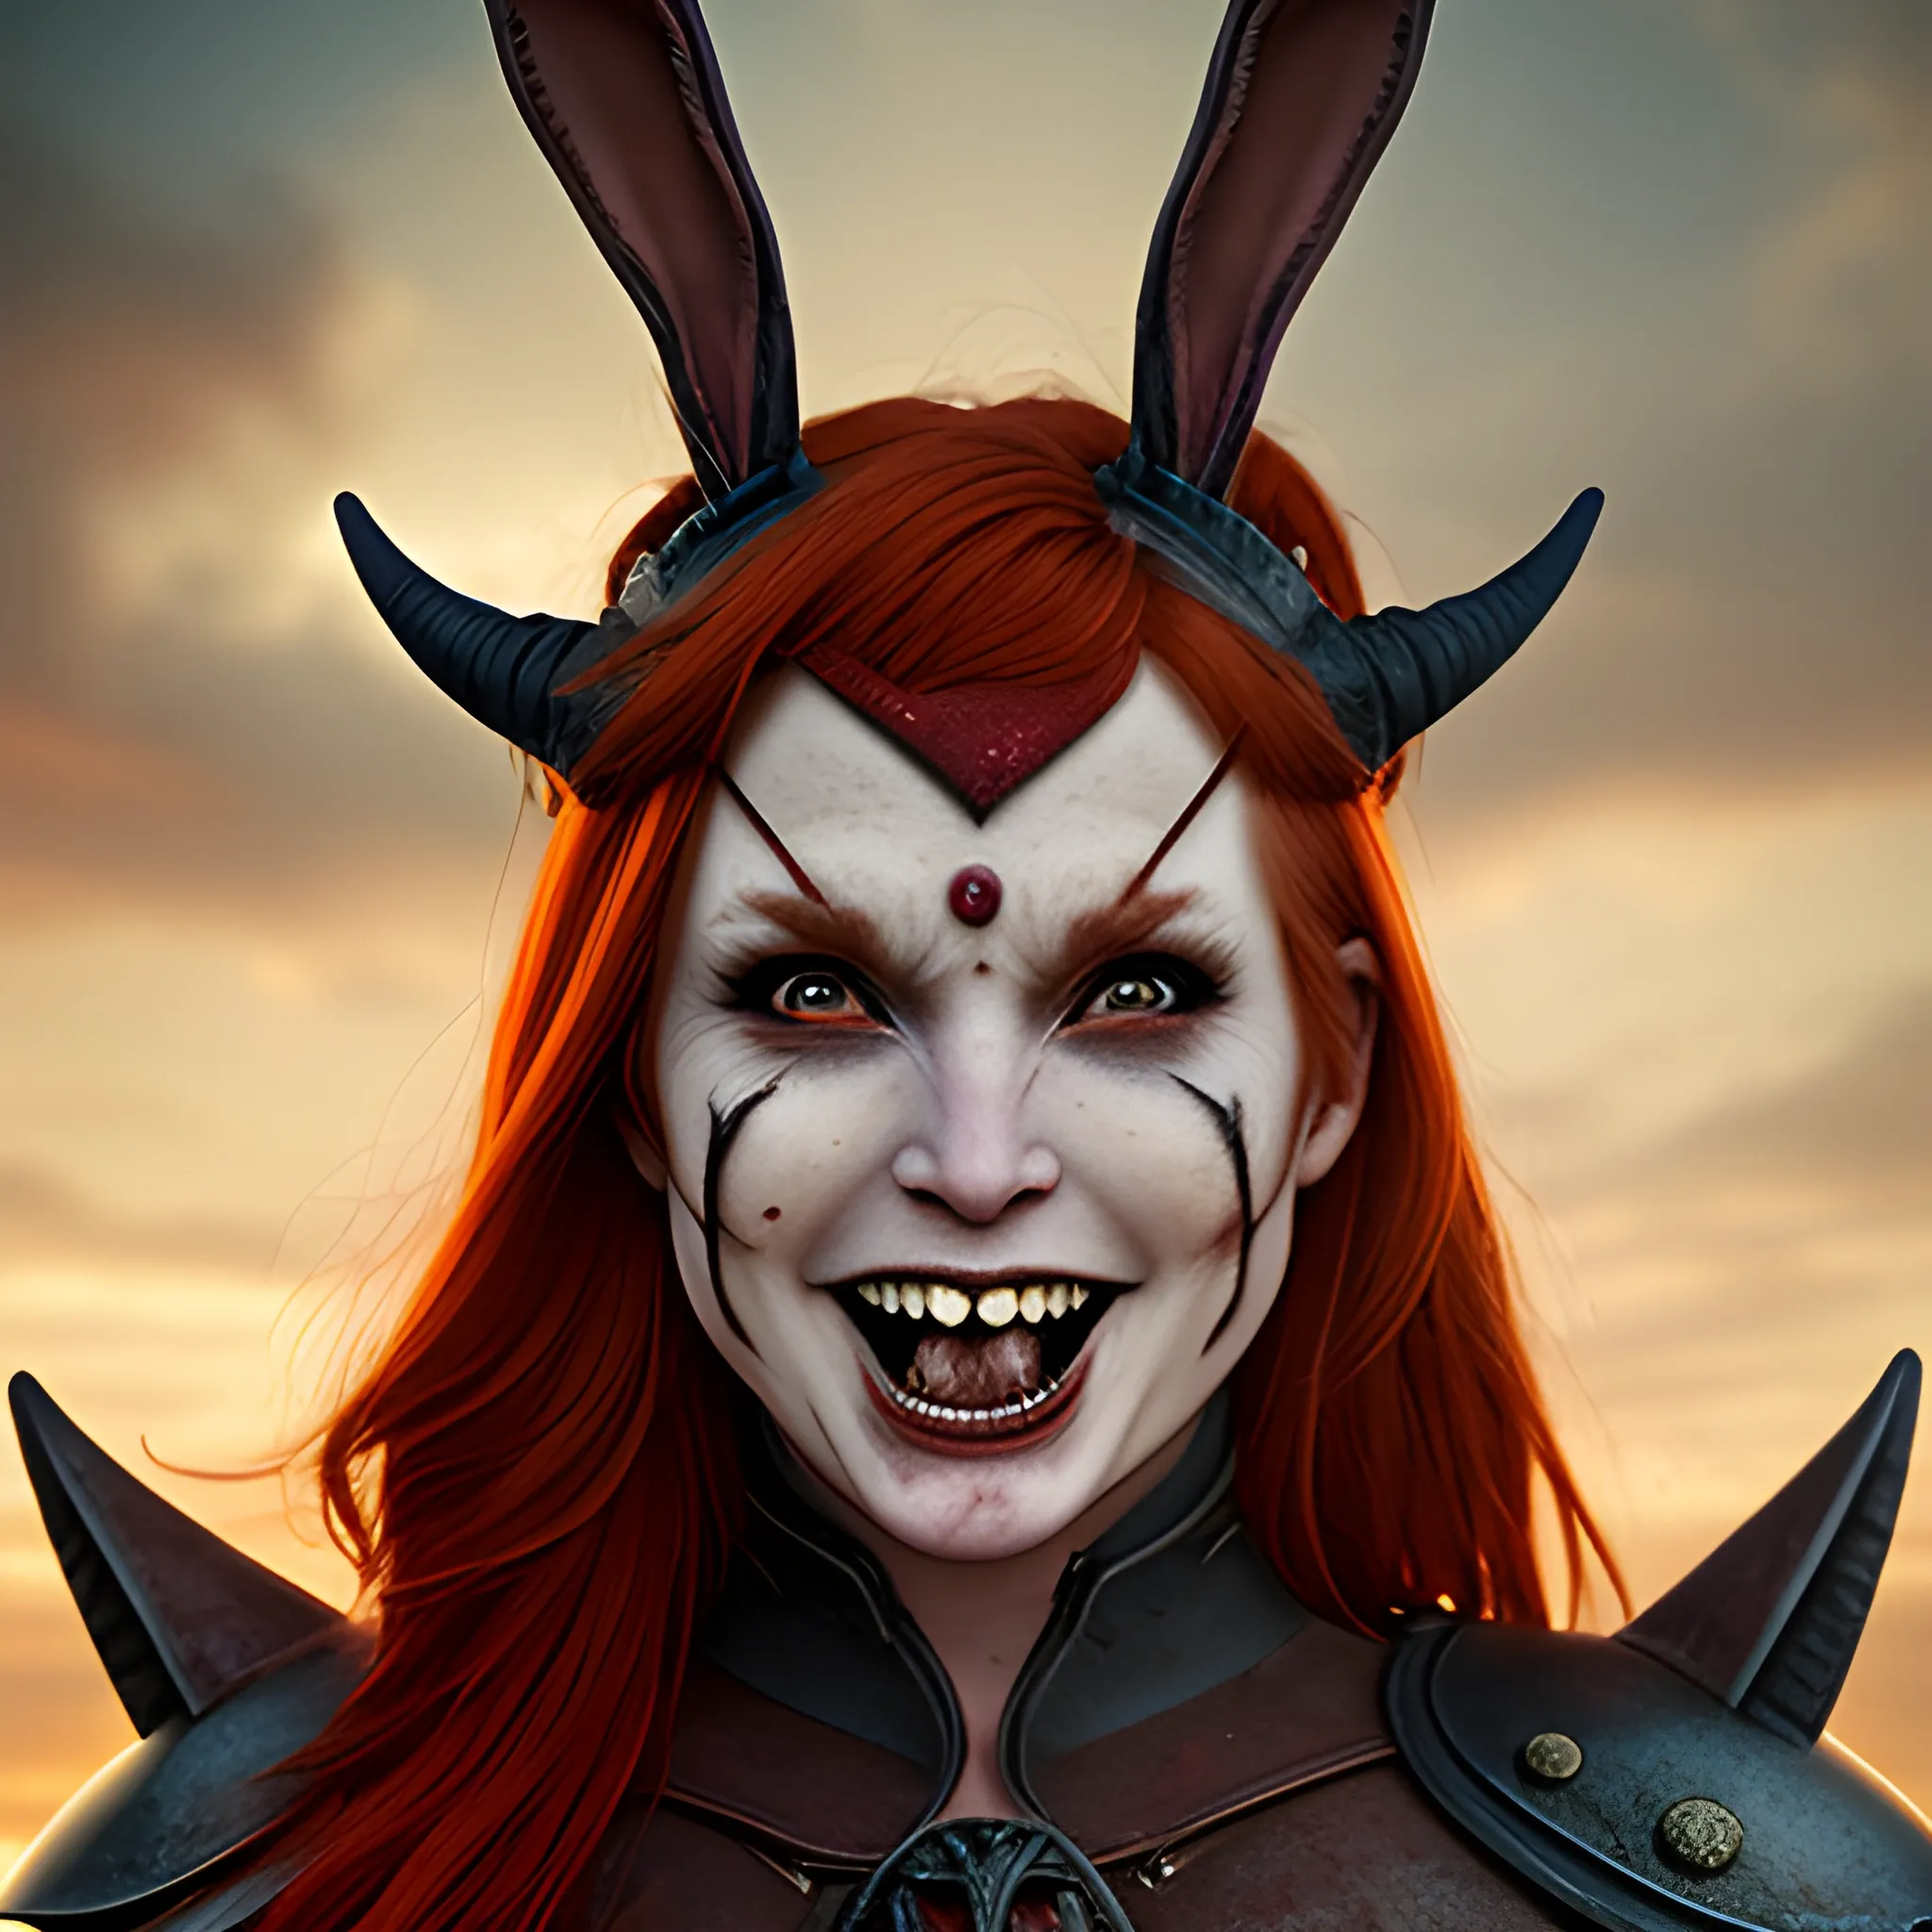 Woman warrior, bunny ears, demon horns on jaw,
 redhead, smooth smile
